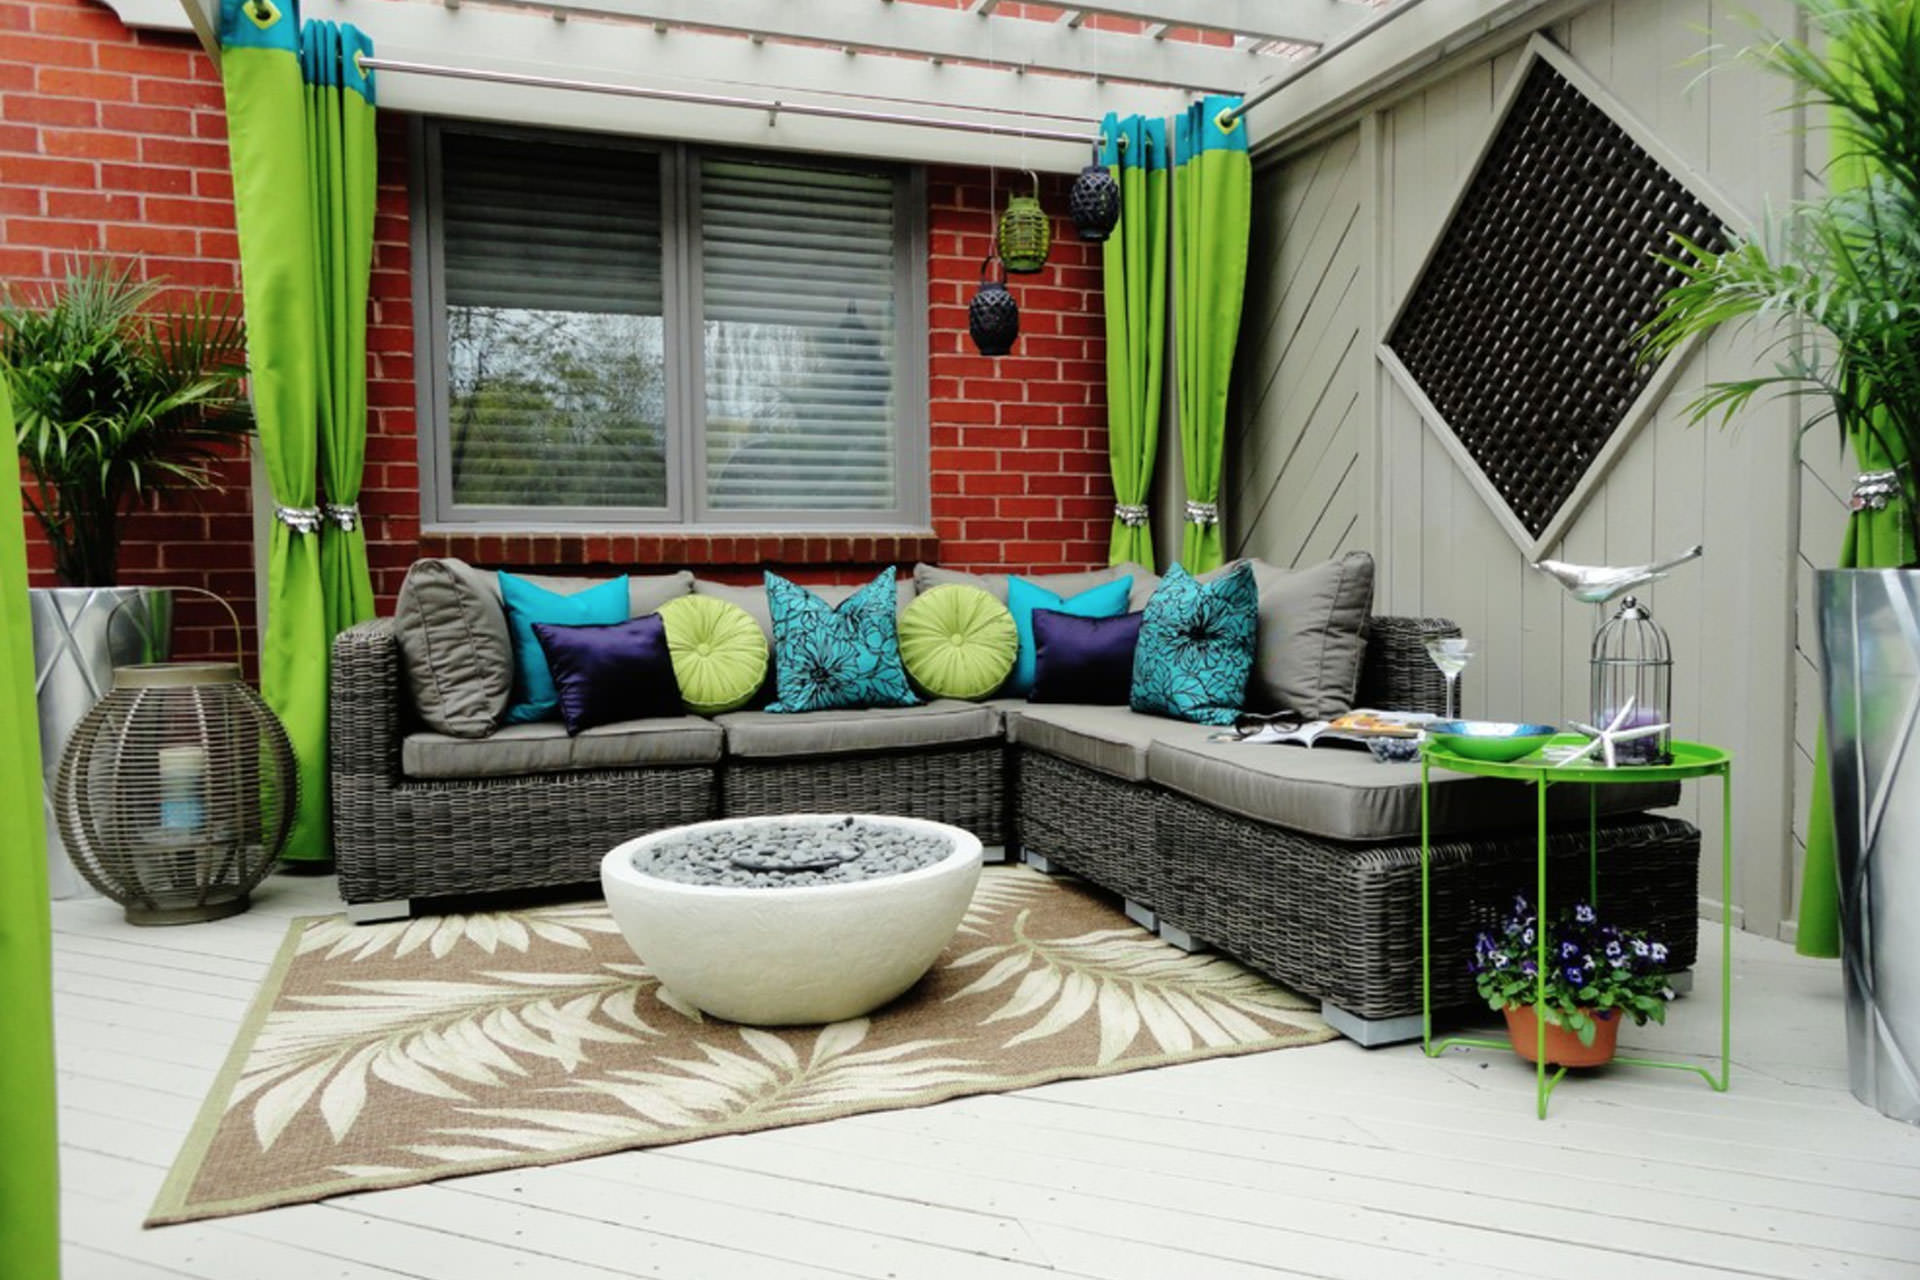 https://www.shadefxcanopies.com/wp-content/uploads/2014/06/accessories-to-personalize-your-outdoor-space-fabrics.jpg